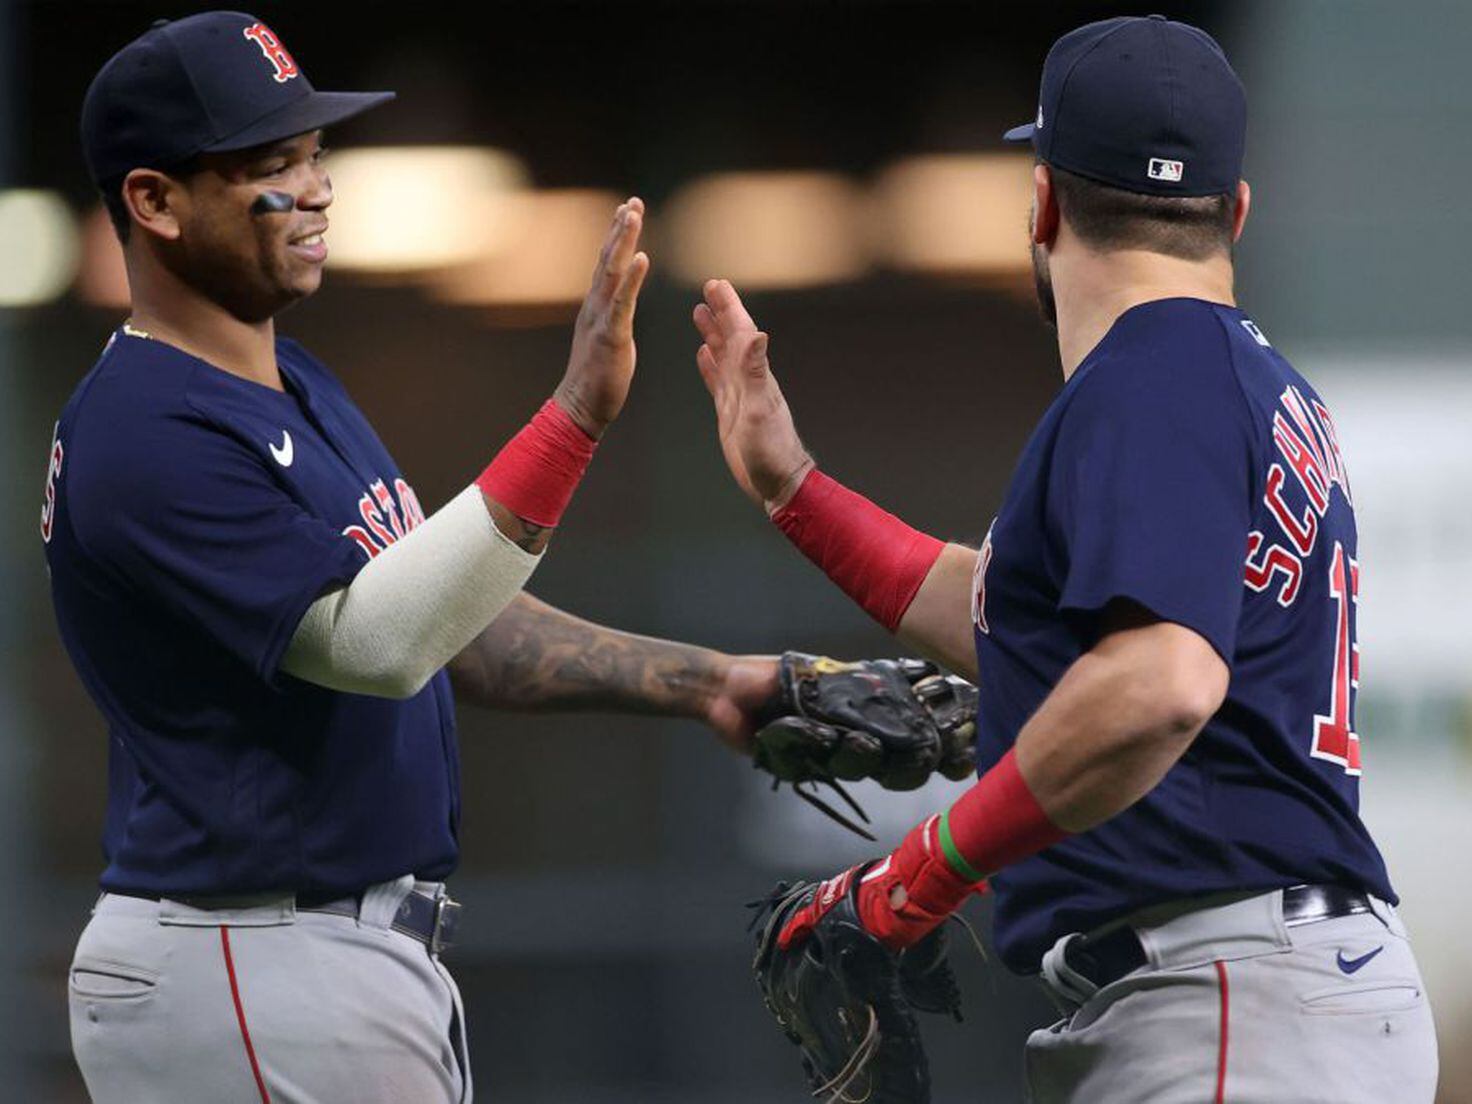 MLB playoffs 2021: Red Sox make history with multiple grand slams